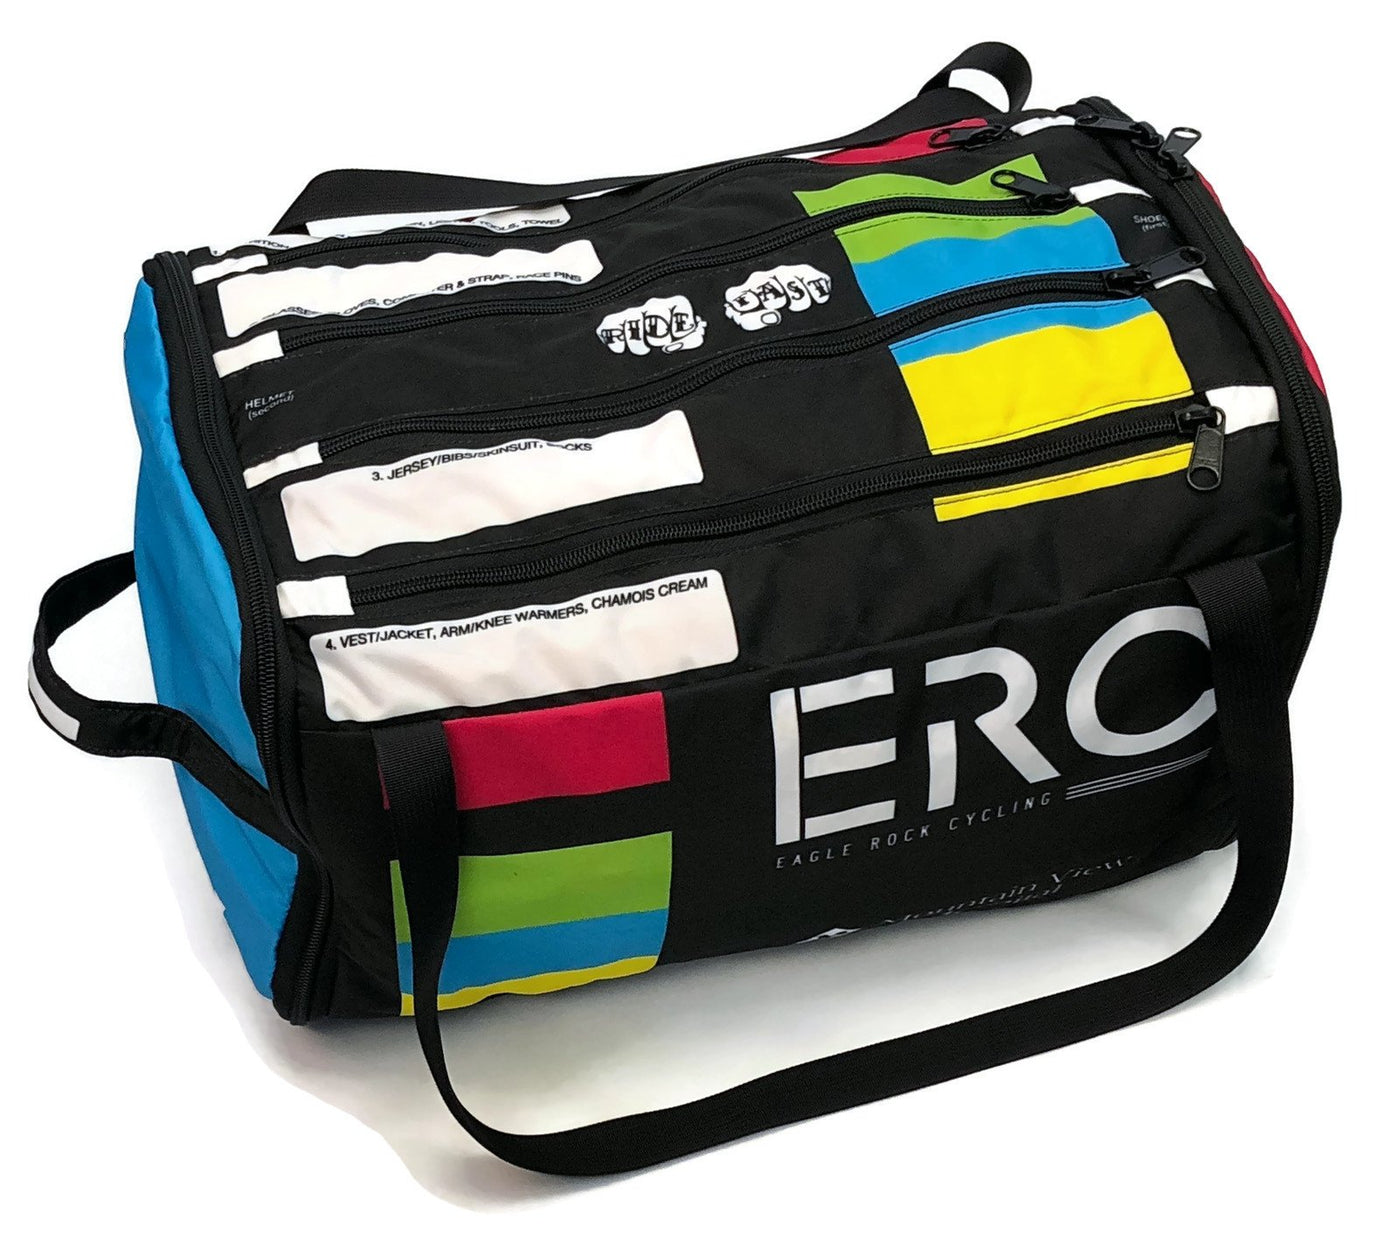 New ERC RACEDAY BAG 2.0 - ships in about 3 weeks